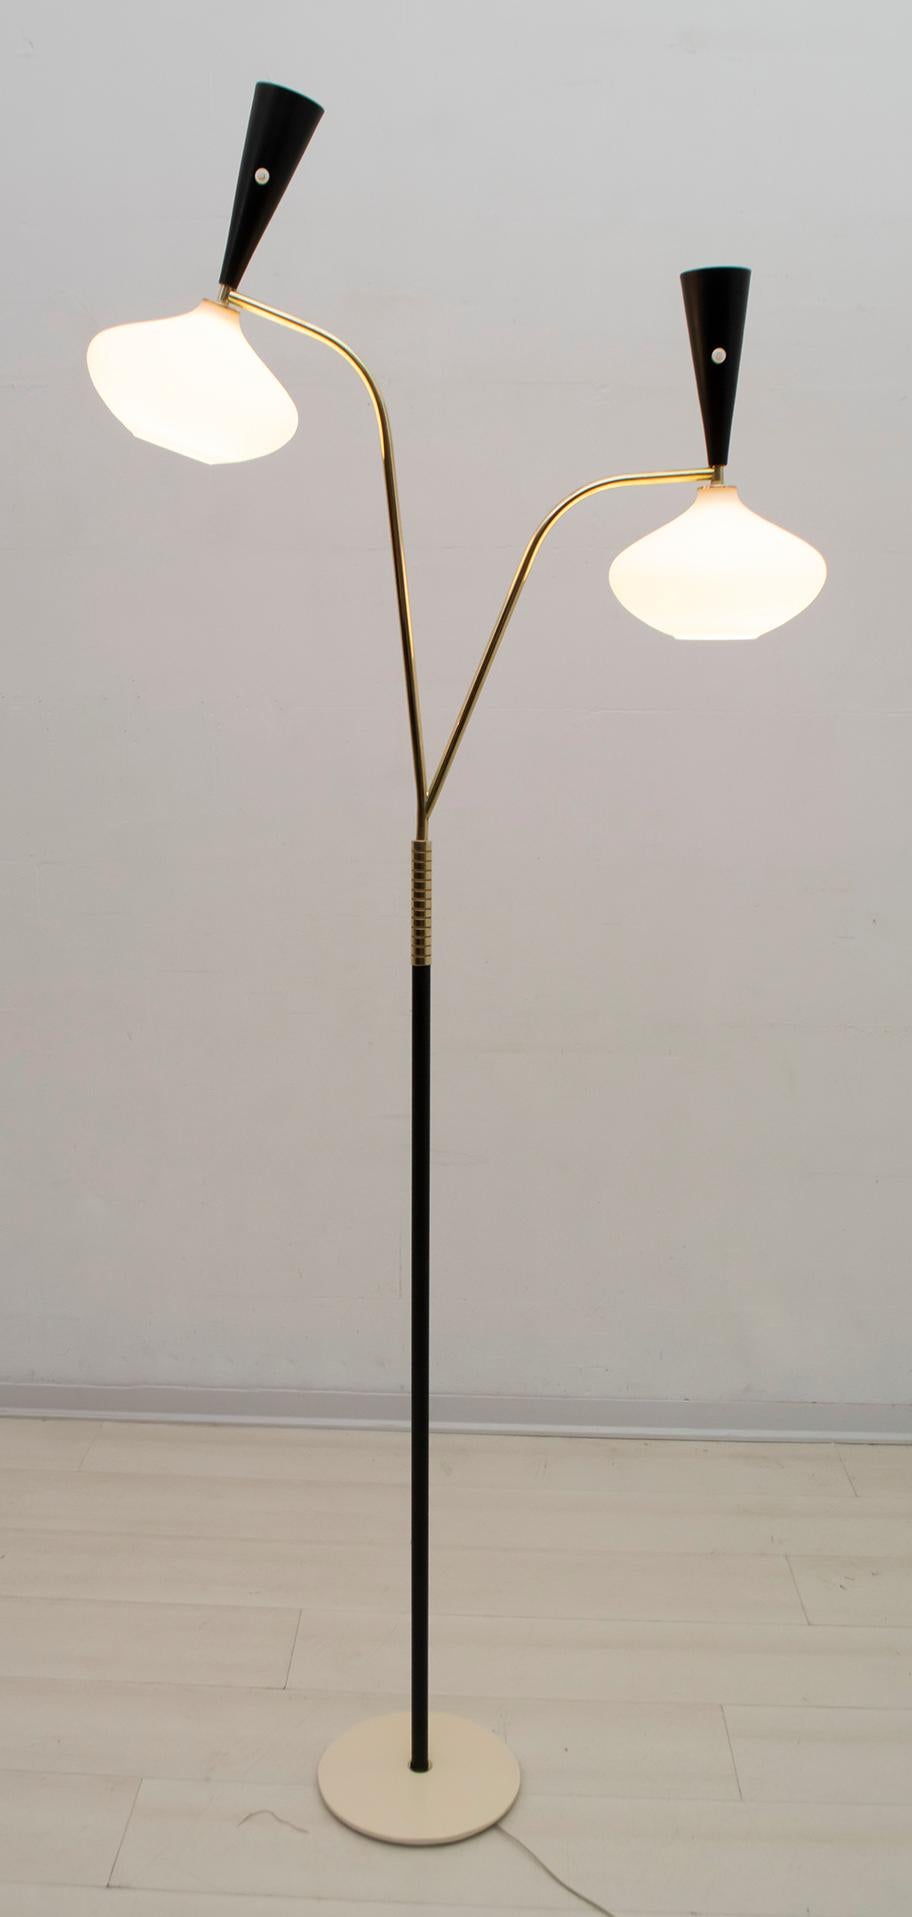 Italian design floor lamp from the 1950s, probably produced by Arredoluce, the lamp has a stem in brass and black lacquered metal, the diffusers are in lacquered aluminum and satin glass, the base in ivory lacquered cast iron, completely restored